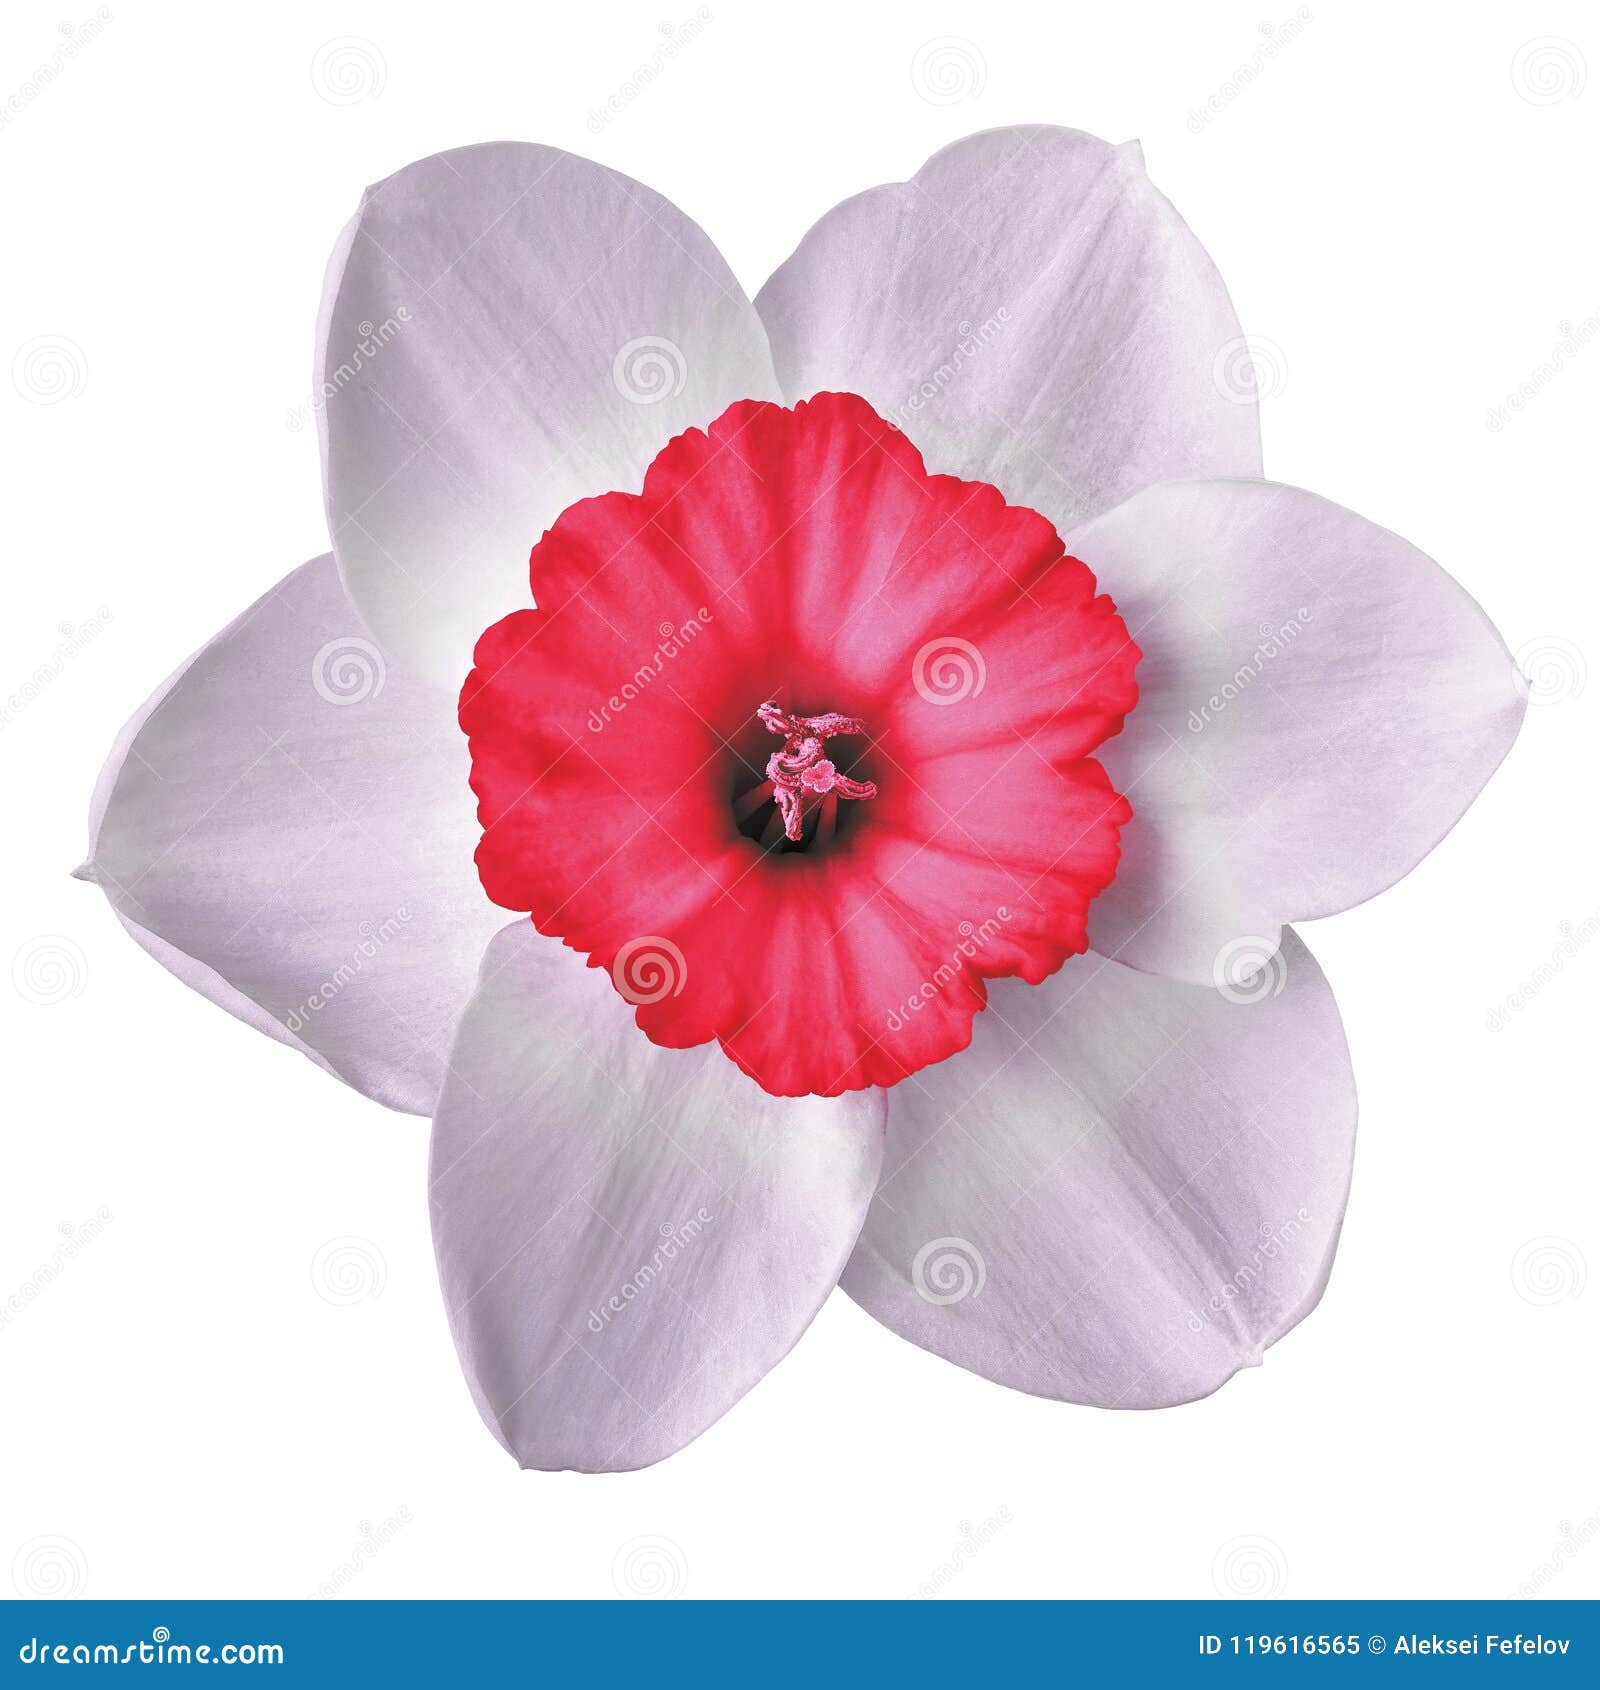 Flower Red White Narcissus, Isolated on a White Background. Close-up ...